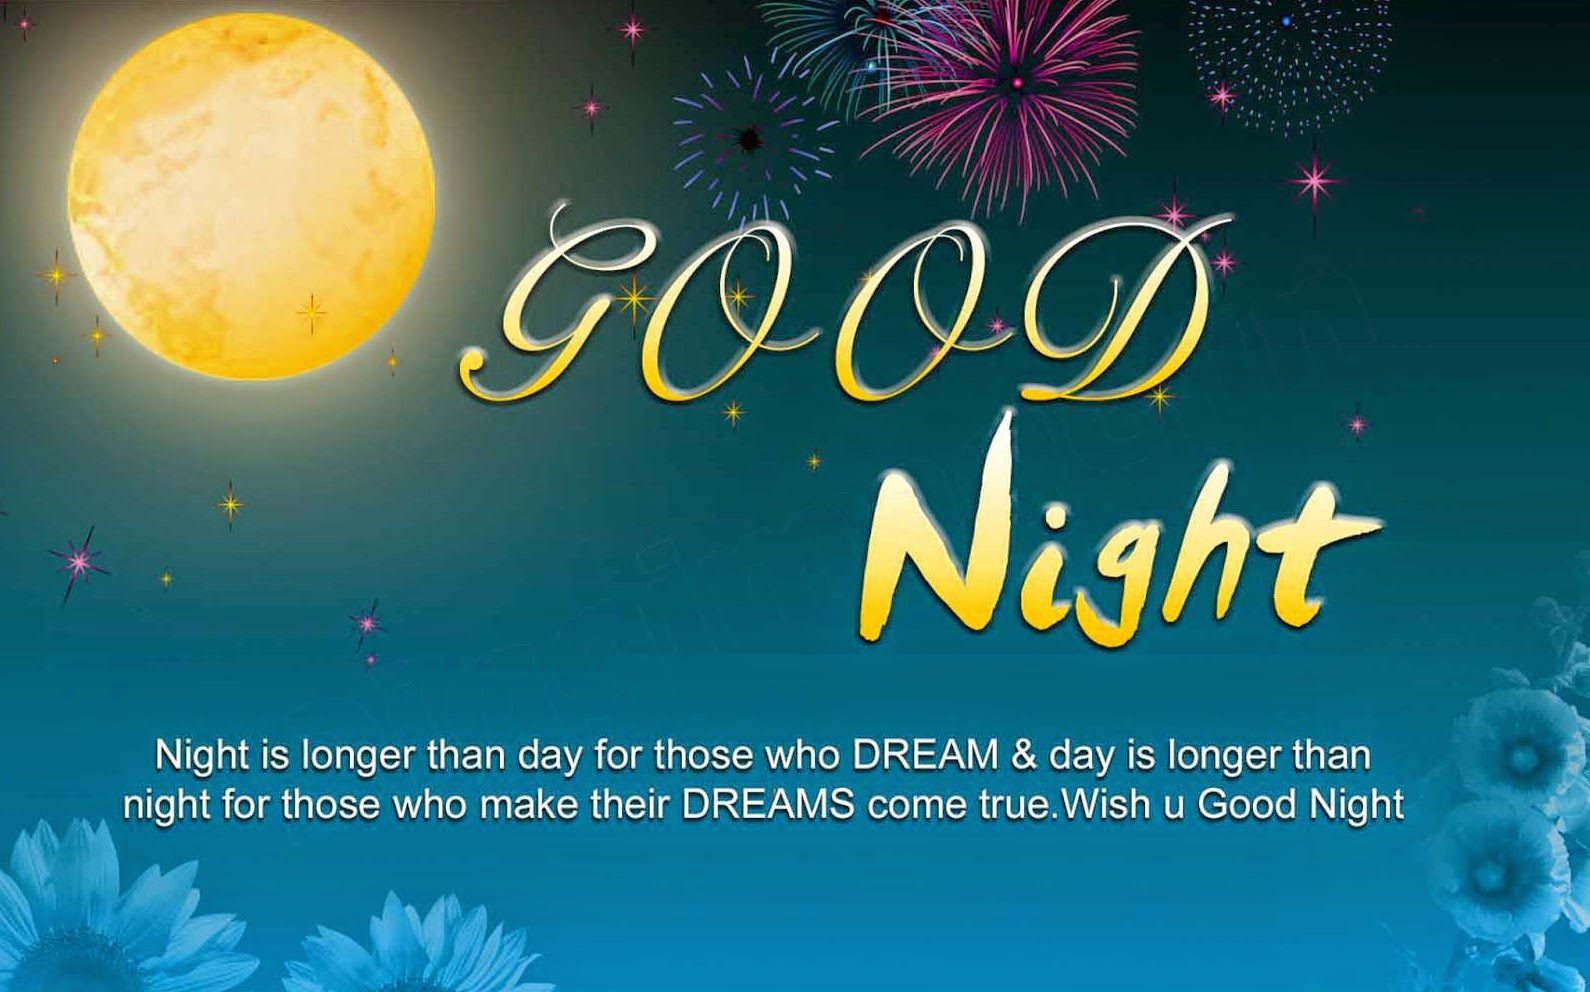 ROMANTIC GOOD NIGHT IMAGES, CARDS, WALLPAPERS - Beautiful Messages